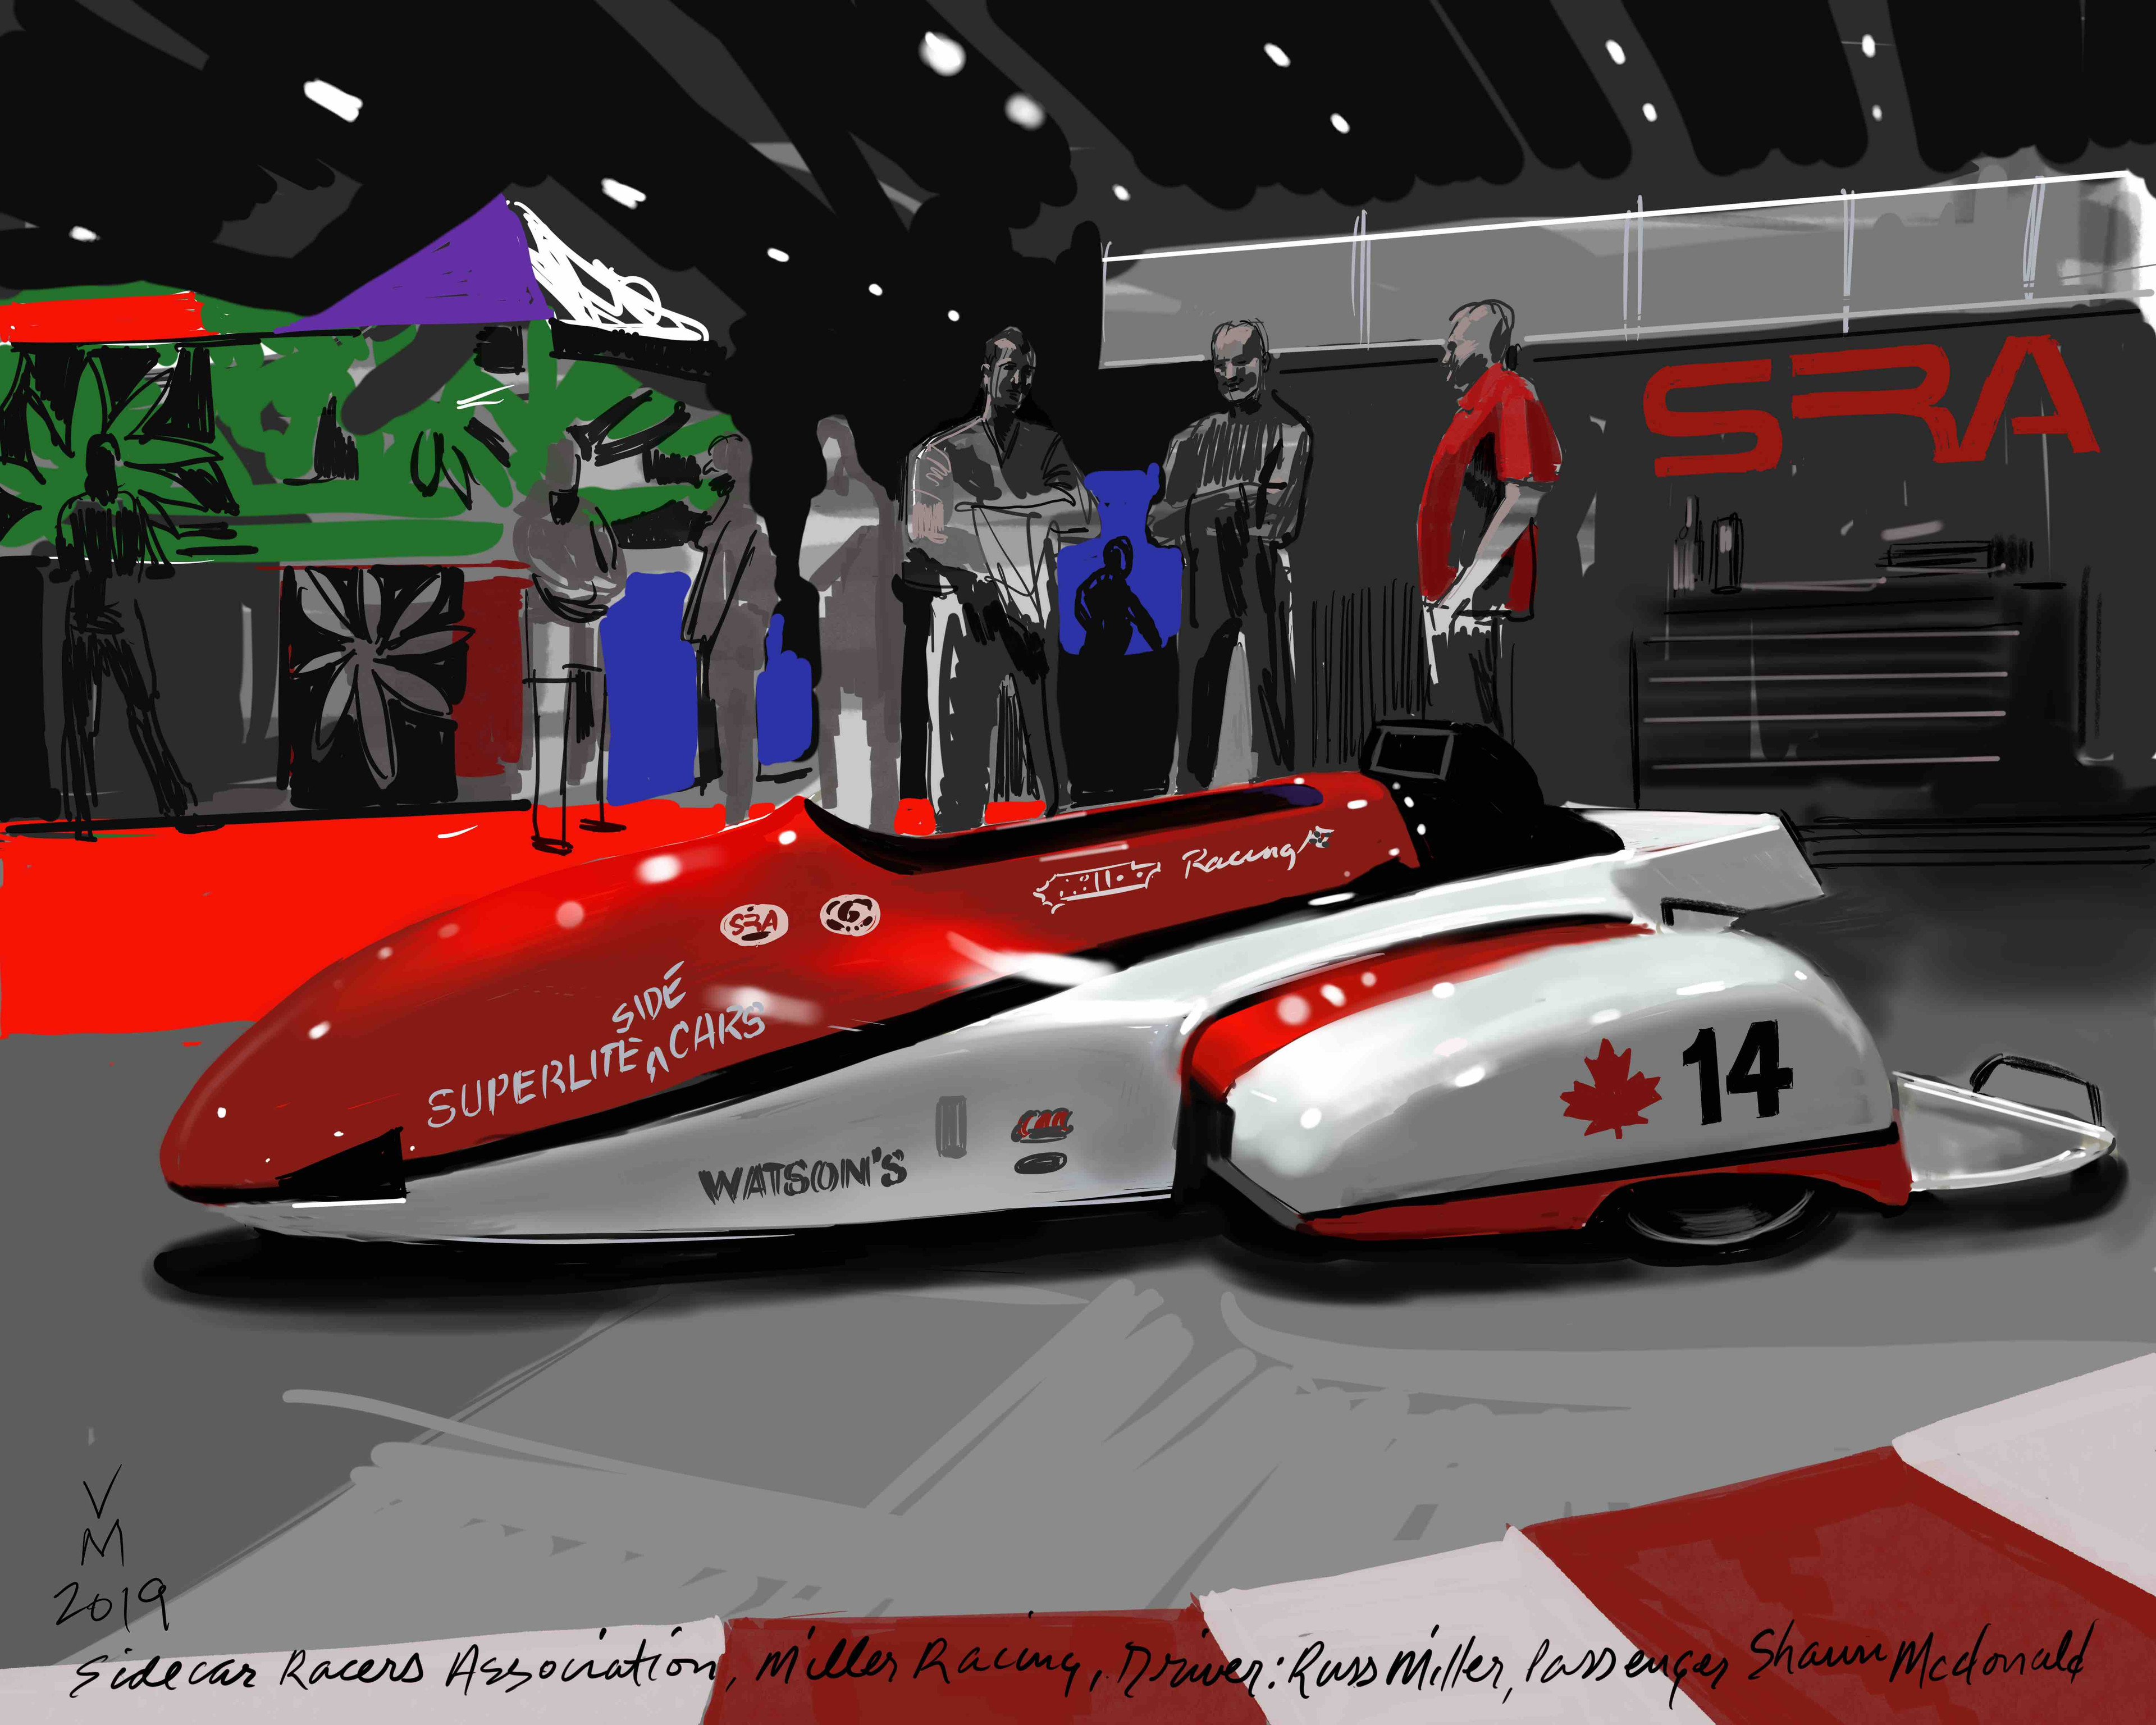 Sidecar Racers Association. This digital painting was created on a i-pad on location.